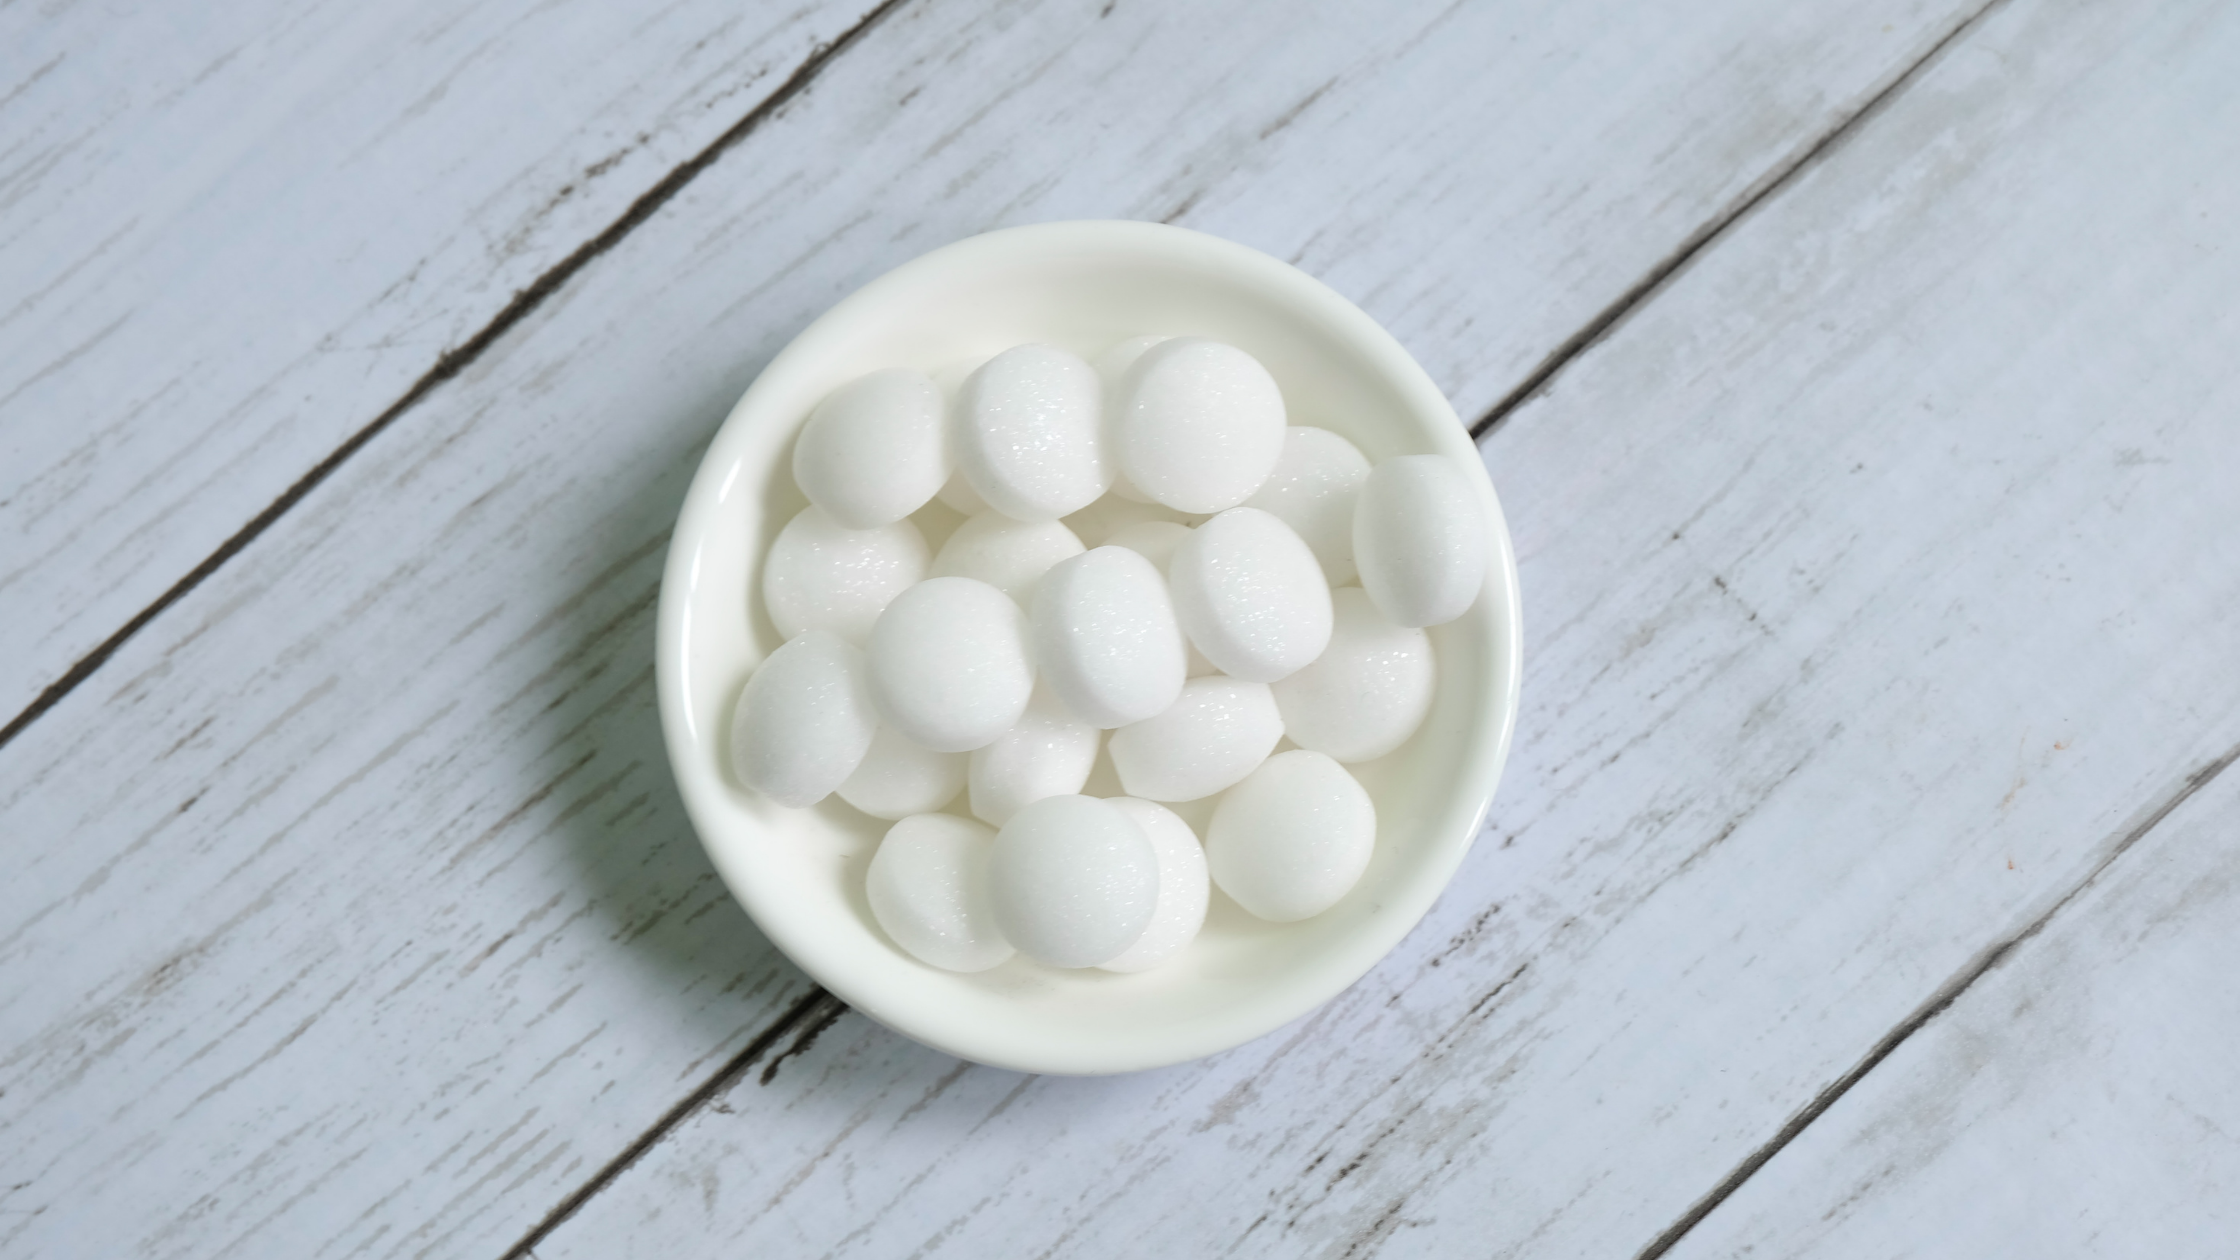 Mothballs are a pesticide and should be used with care